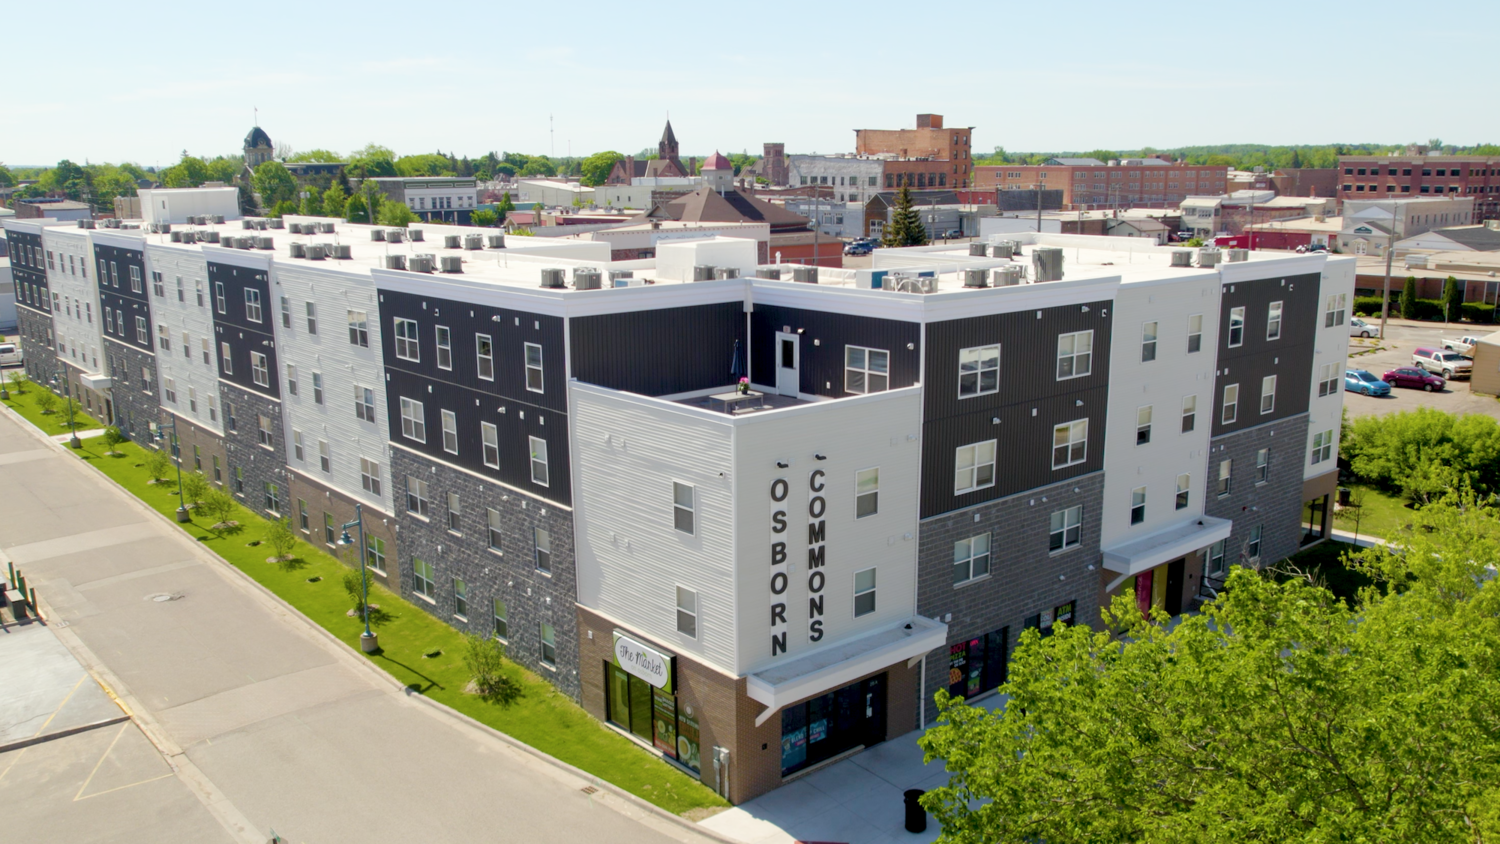 Aerial view of large, multi-story brick building reading "Osborn Commons" on its side.